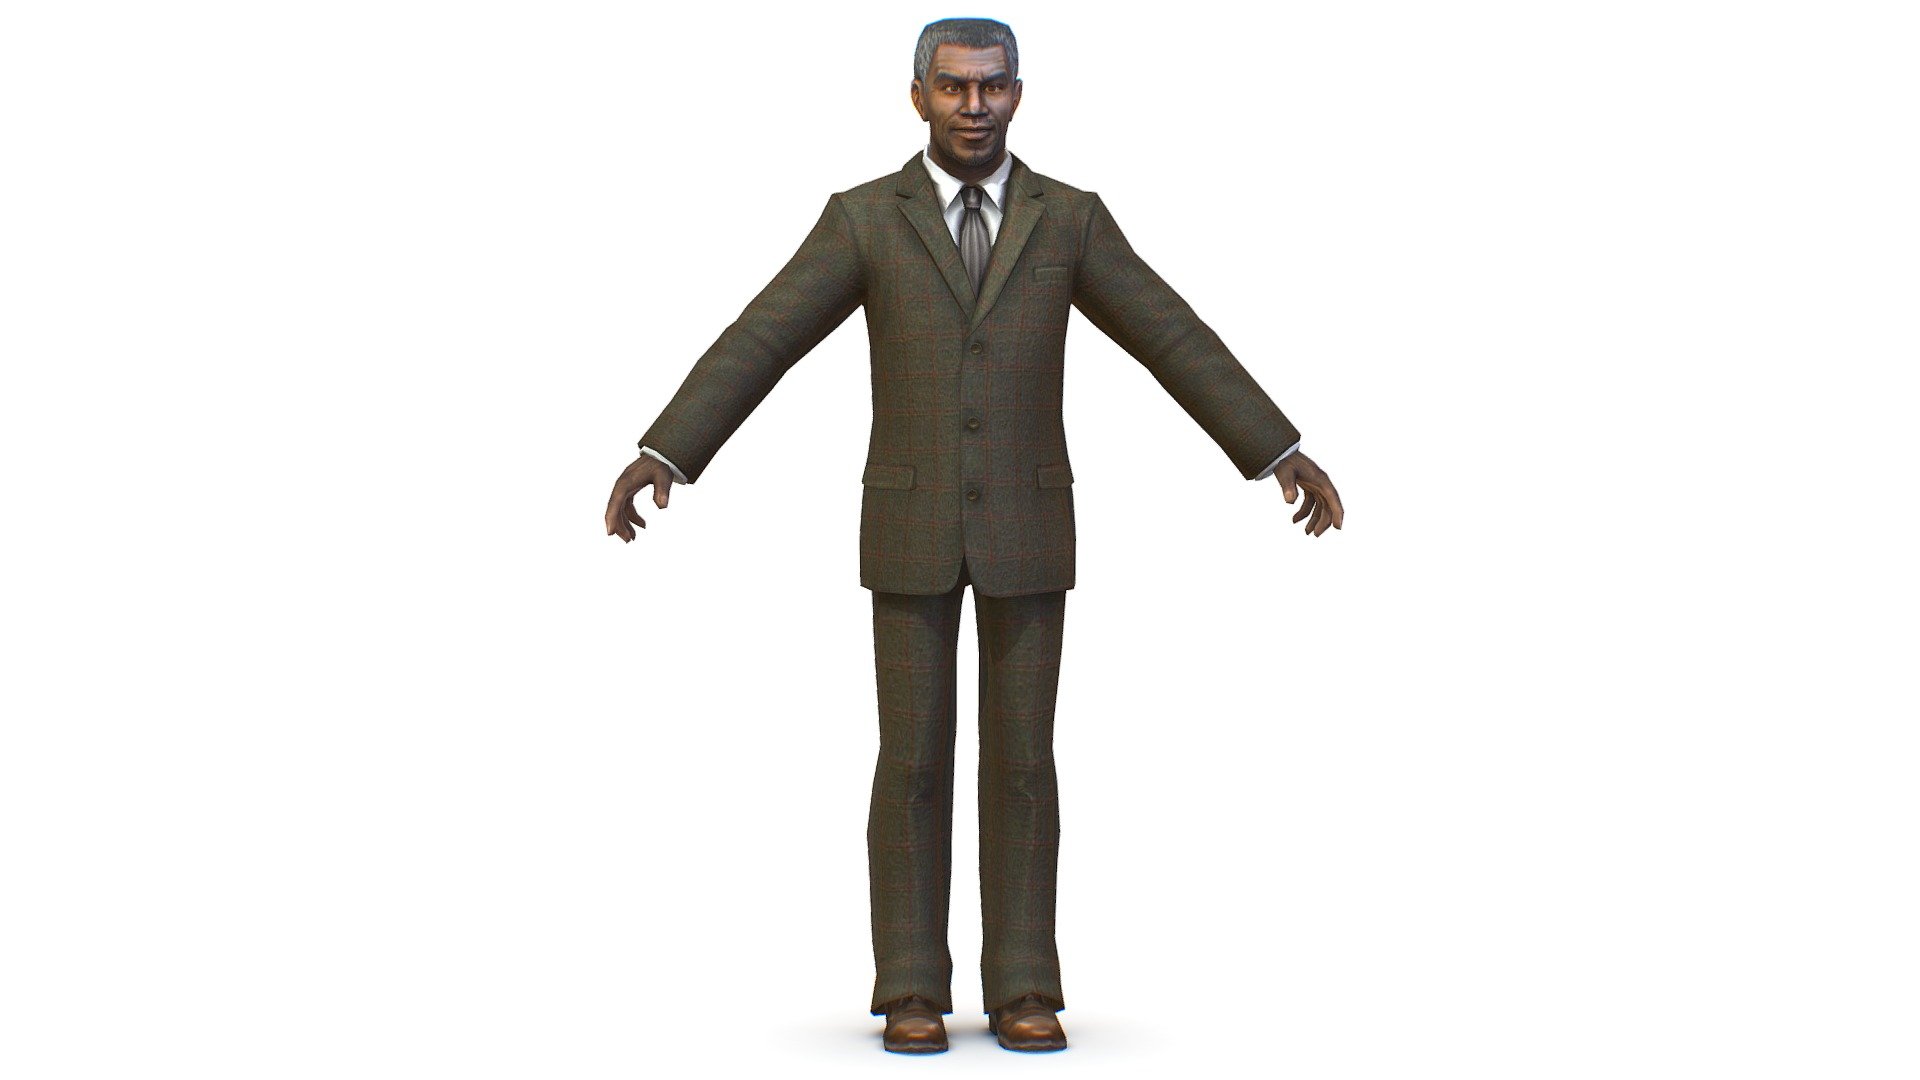 African-American Man in a Suit - 3dsMax file included/ texture 512 color only, head and body 3d model